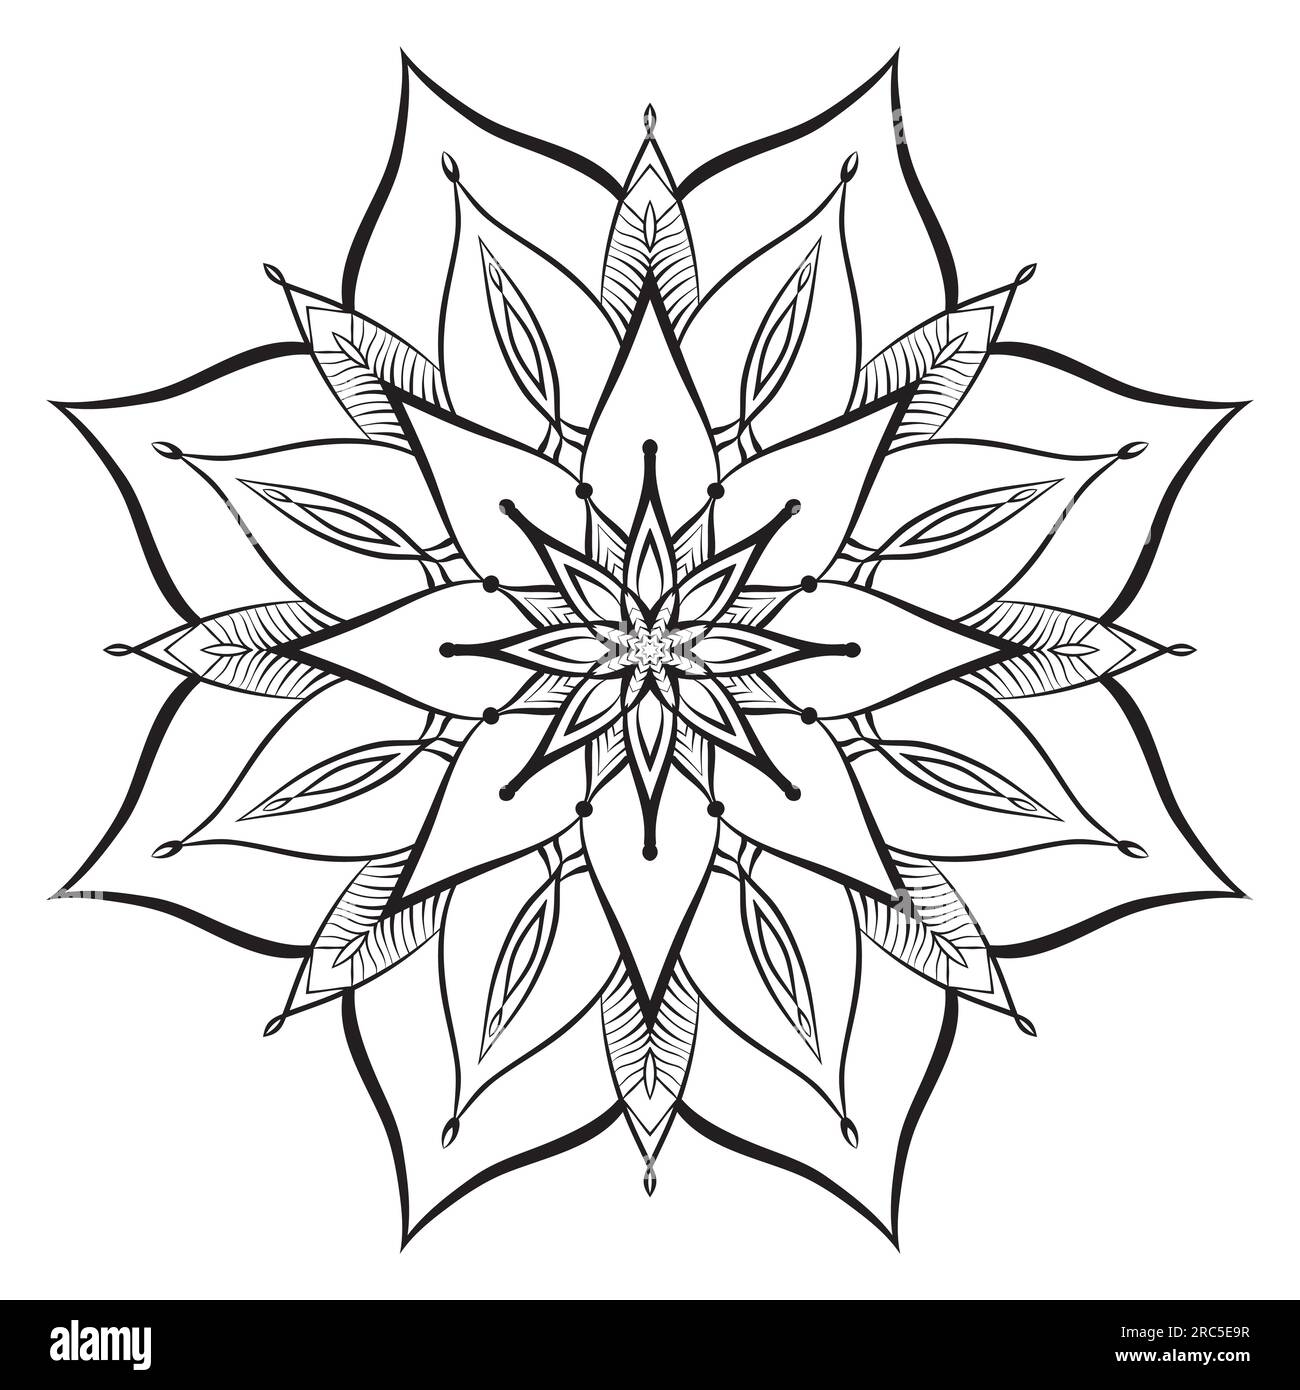 Flower mandala coloring page. Simple symmetric floral shape for mindful coloring Stock Vector